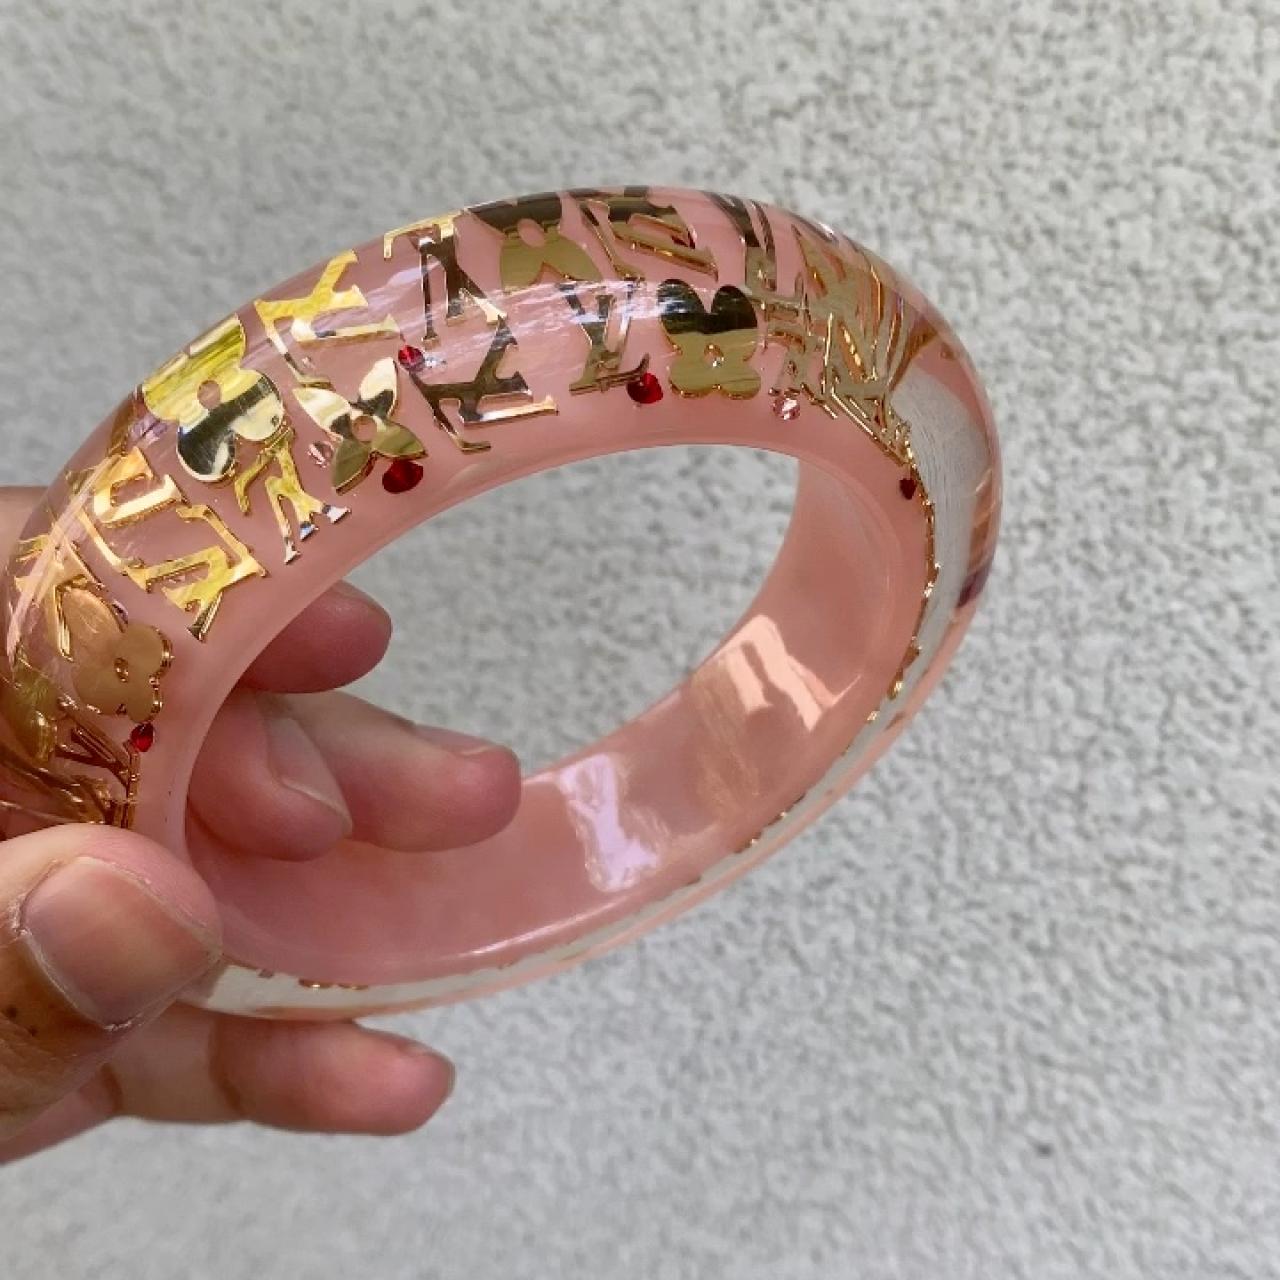 vuitton inclusion ring pink